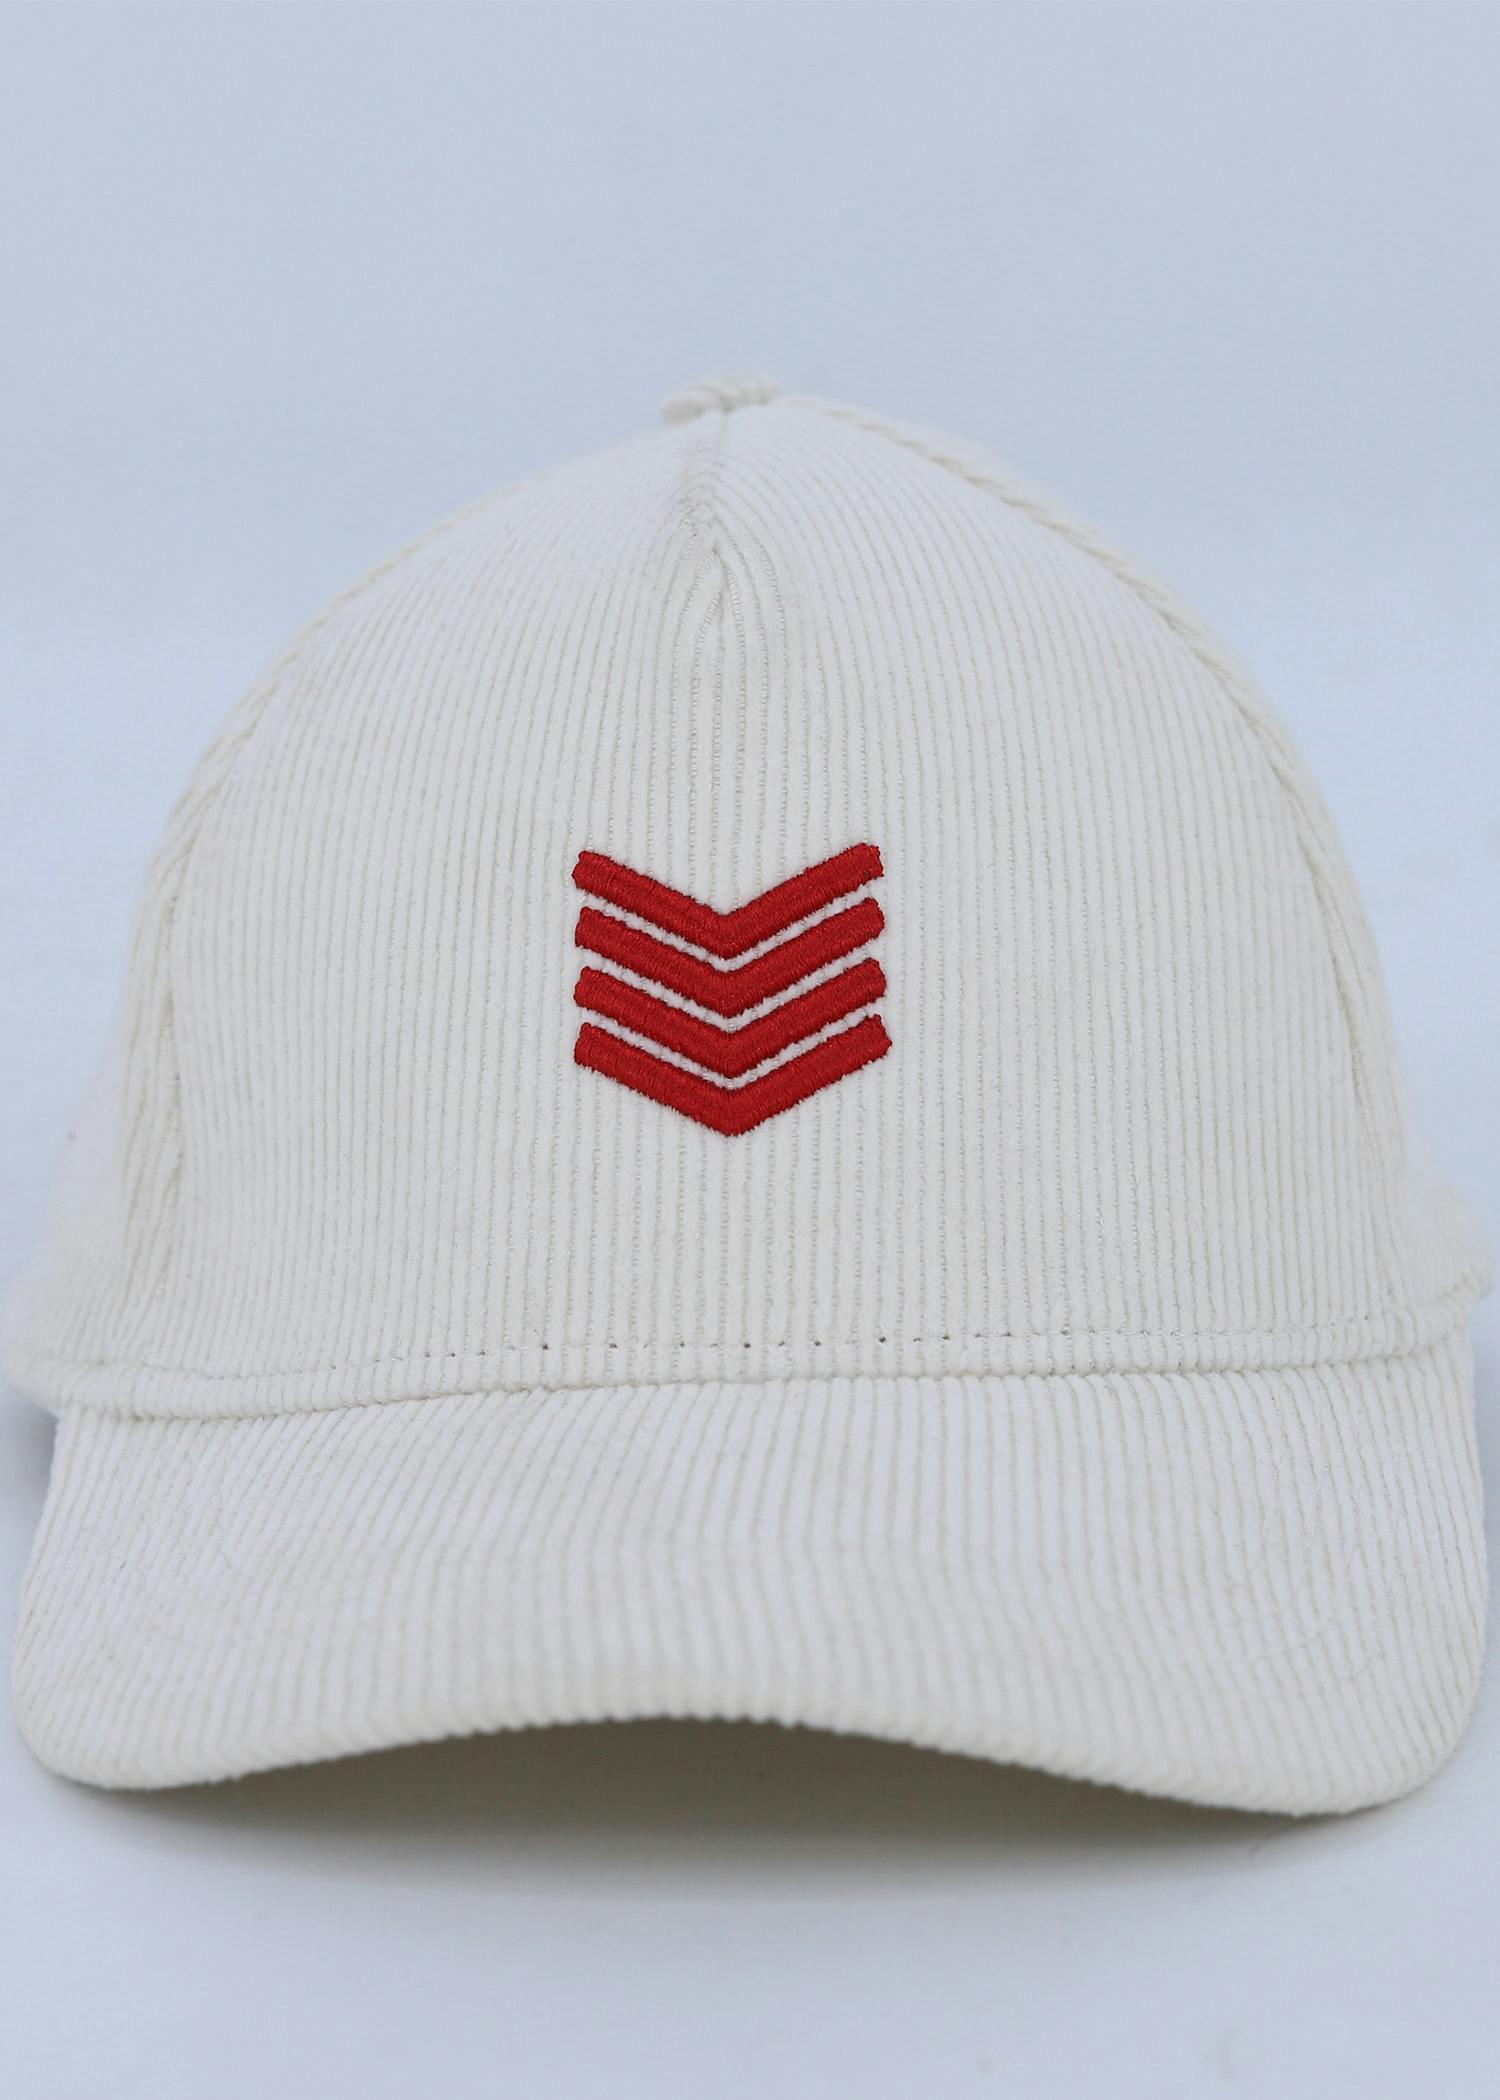 rooster cord cap white color front view